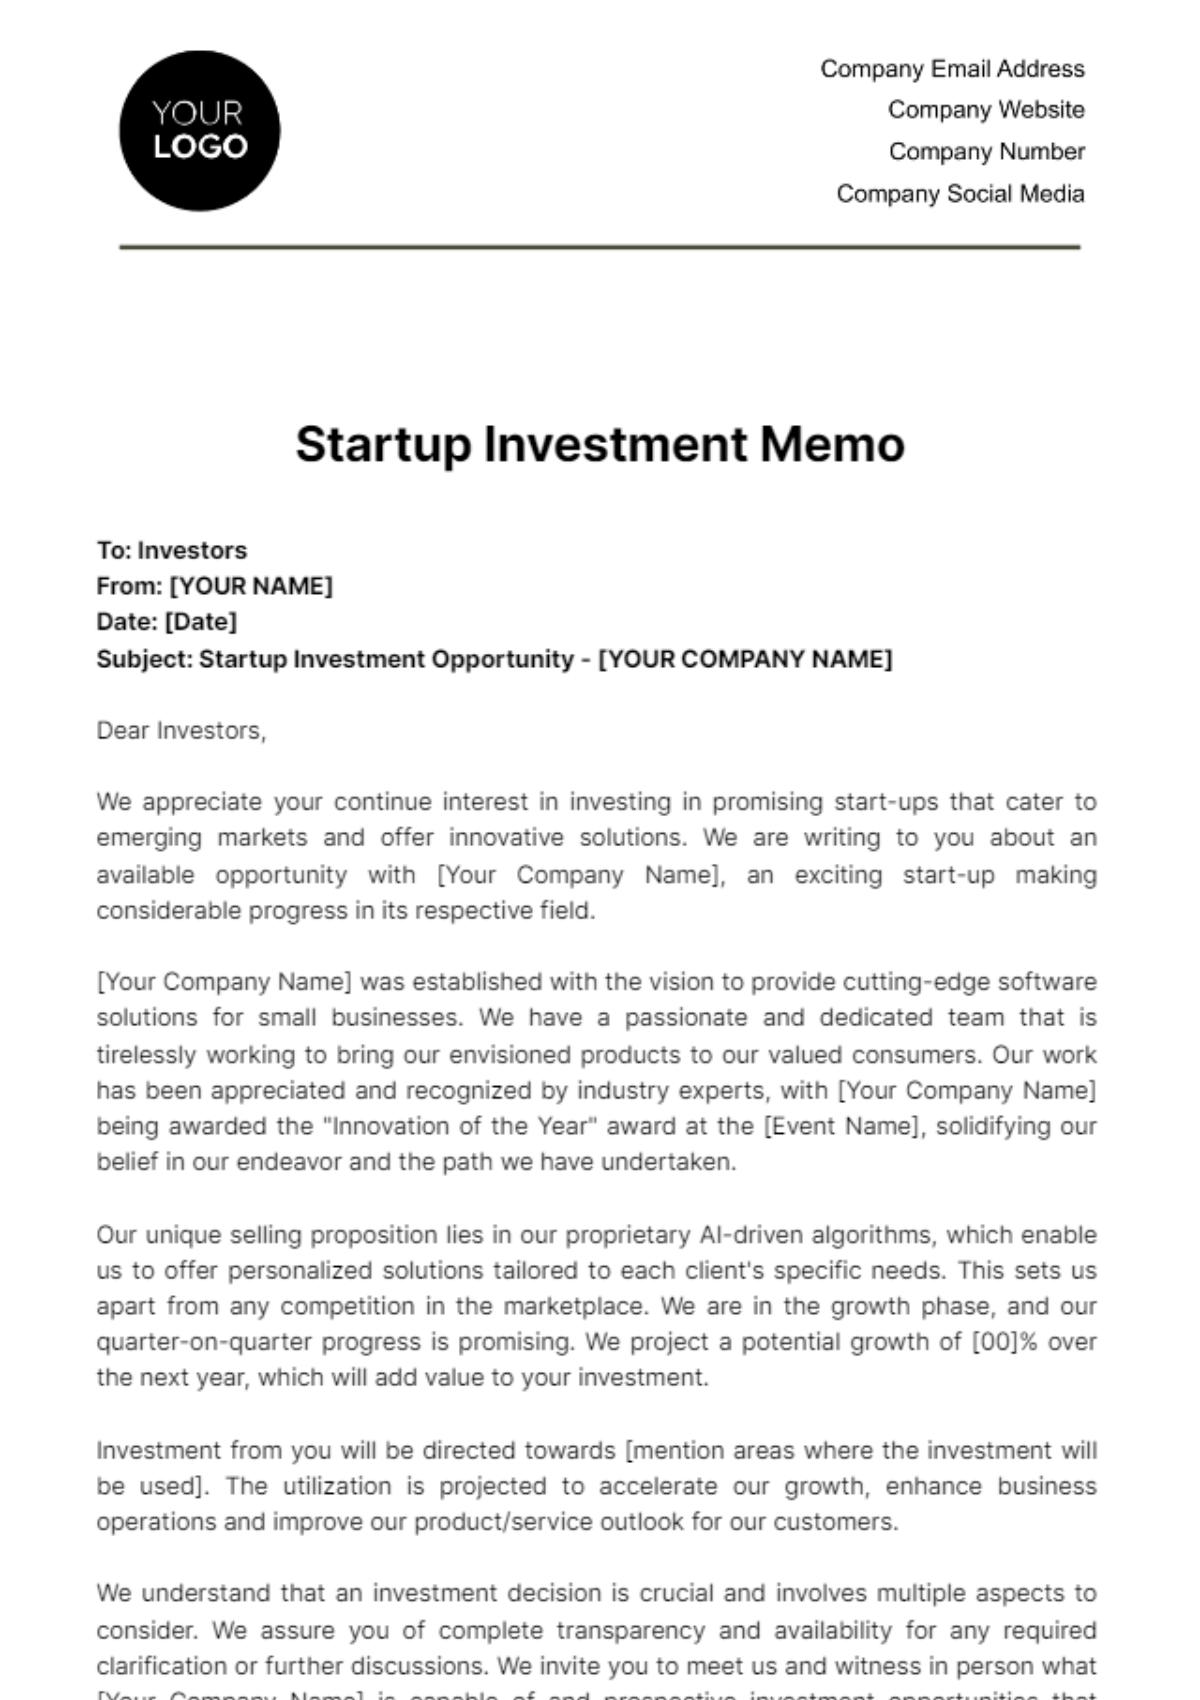 Startup Investment Memo Template